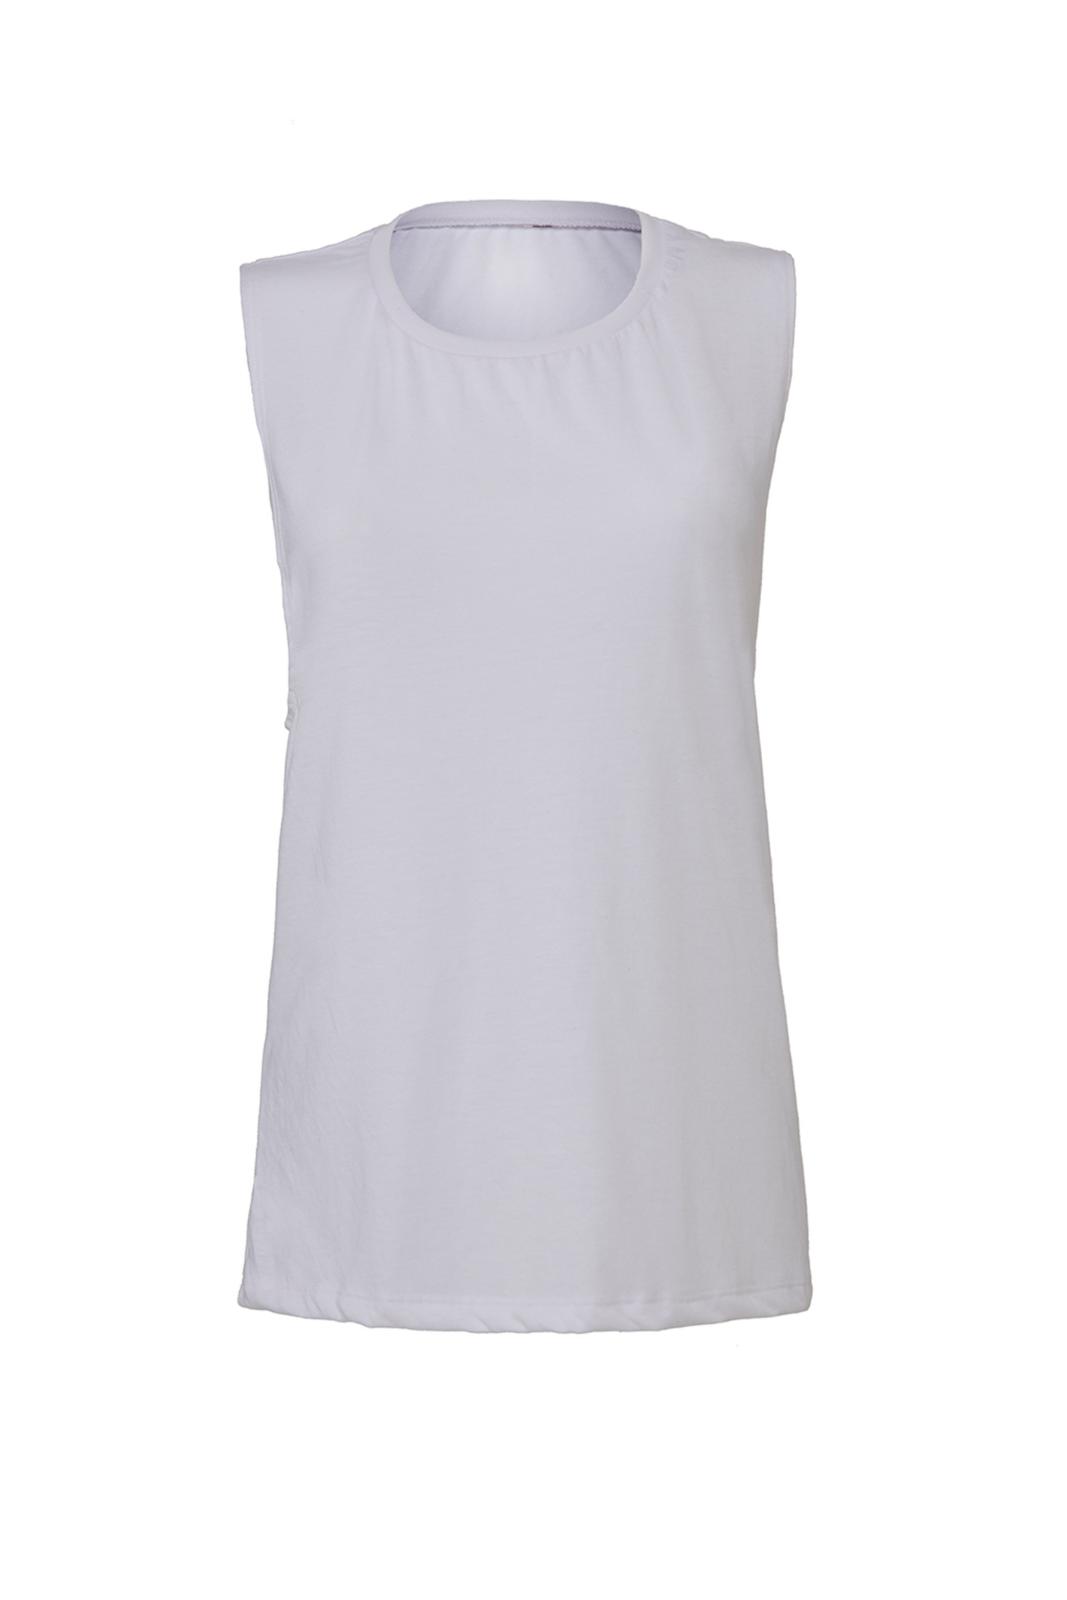 TRANSFORMATION NATION SCOOP MUSCLE TANK